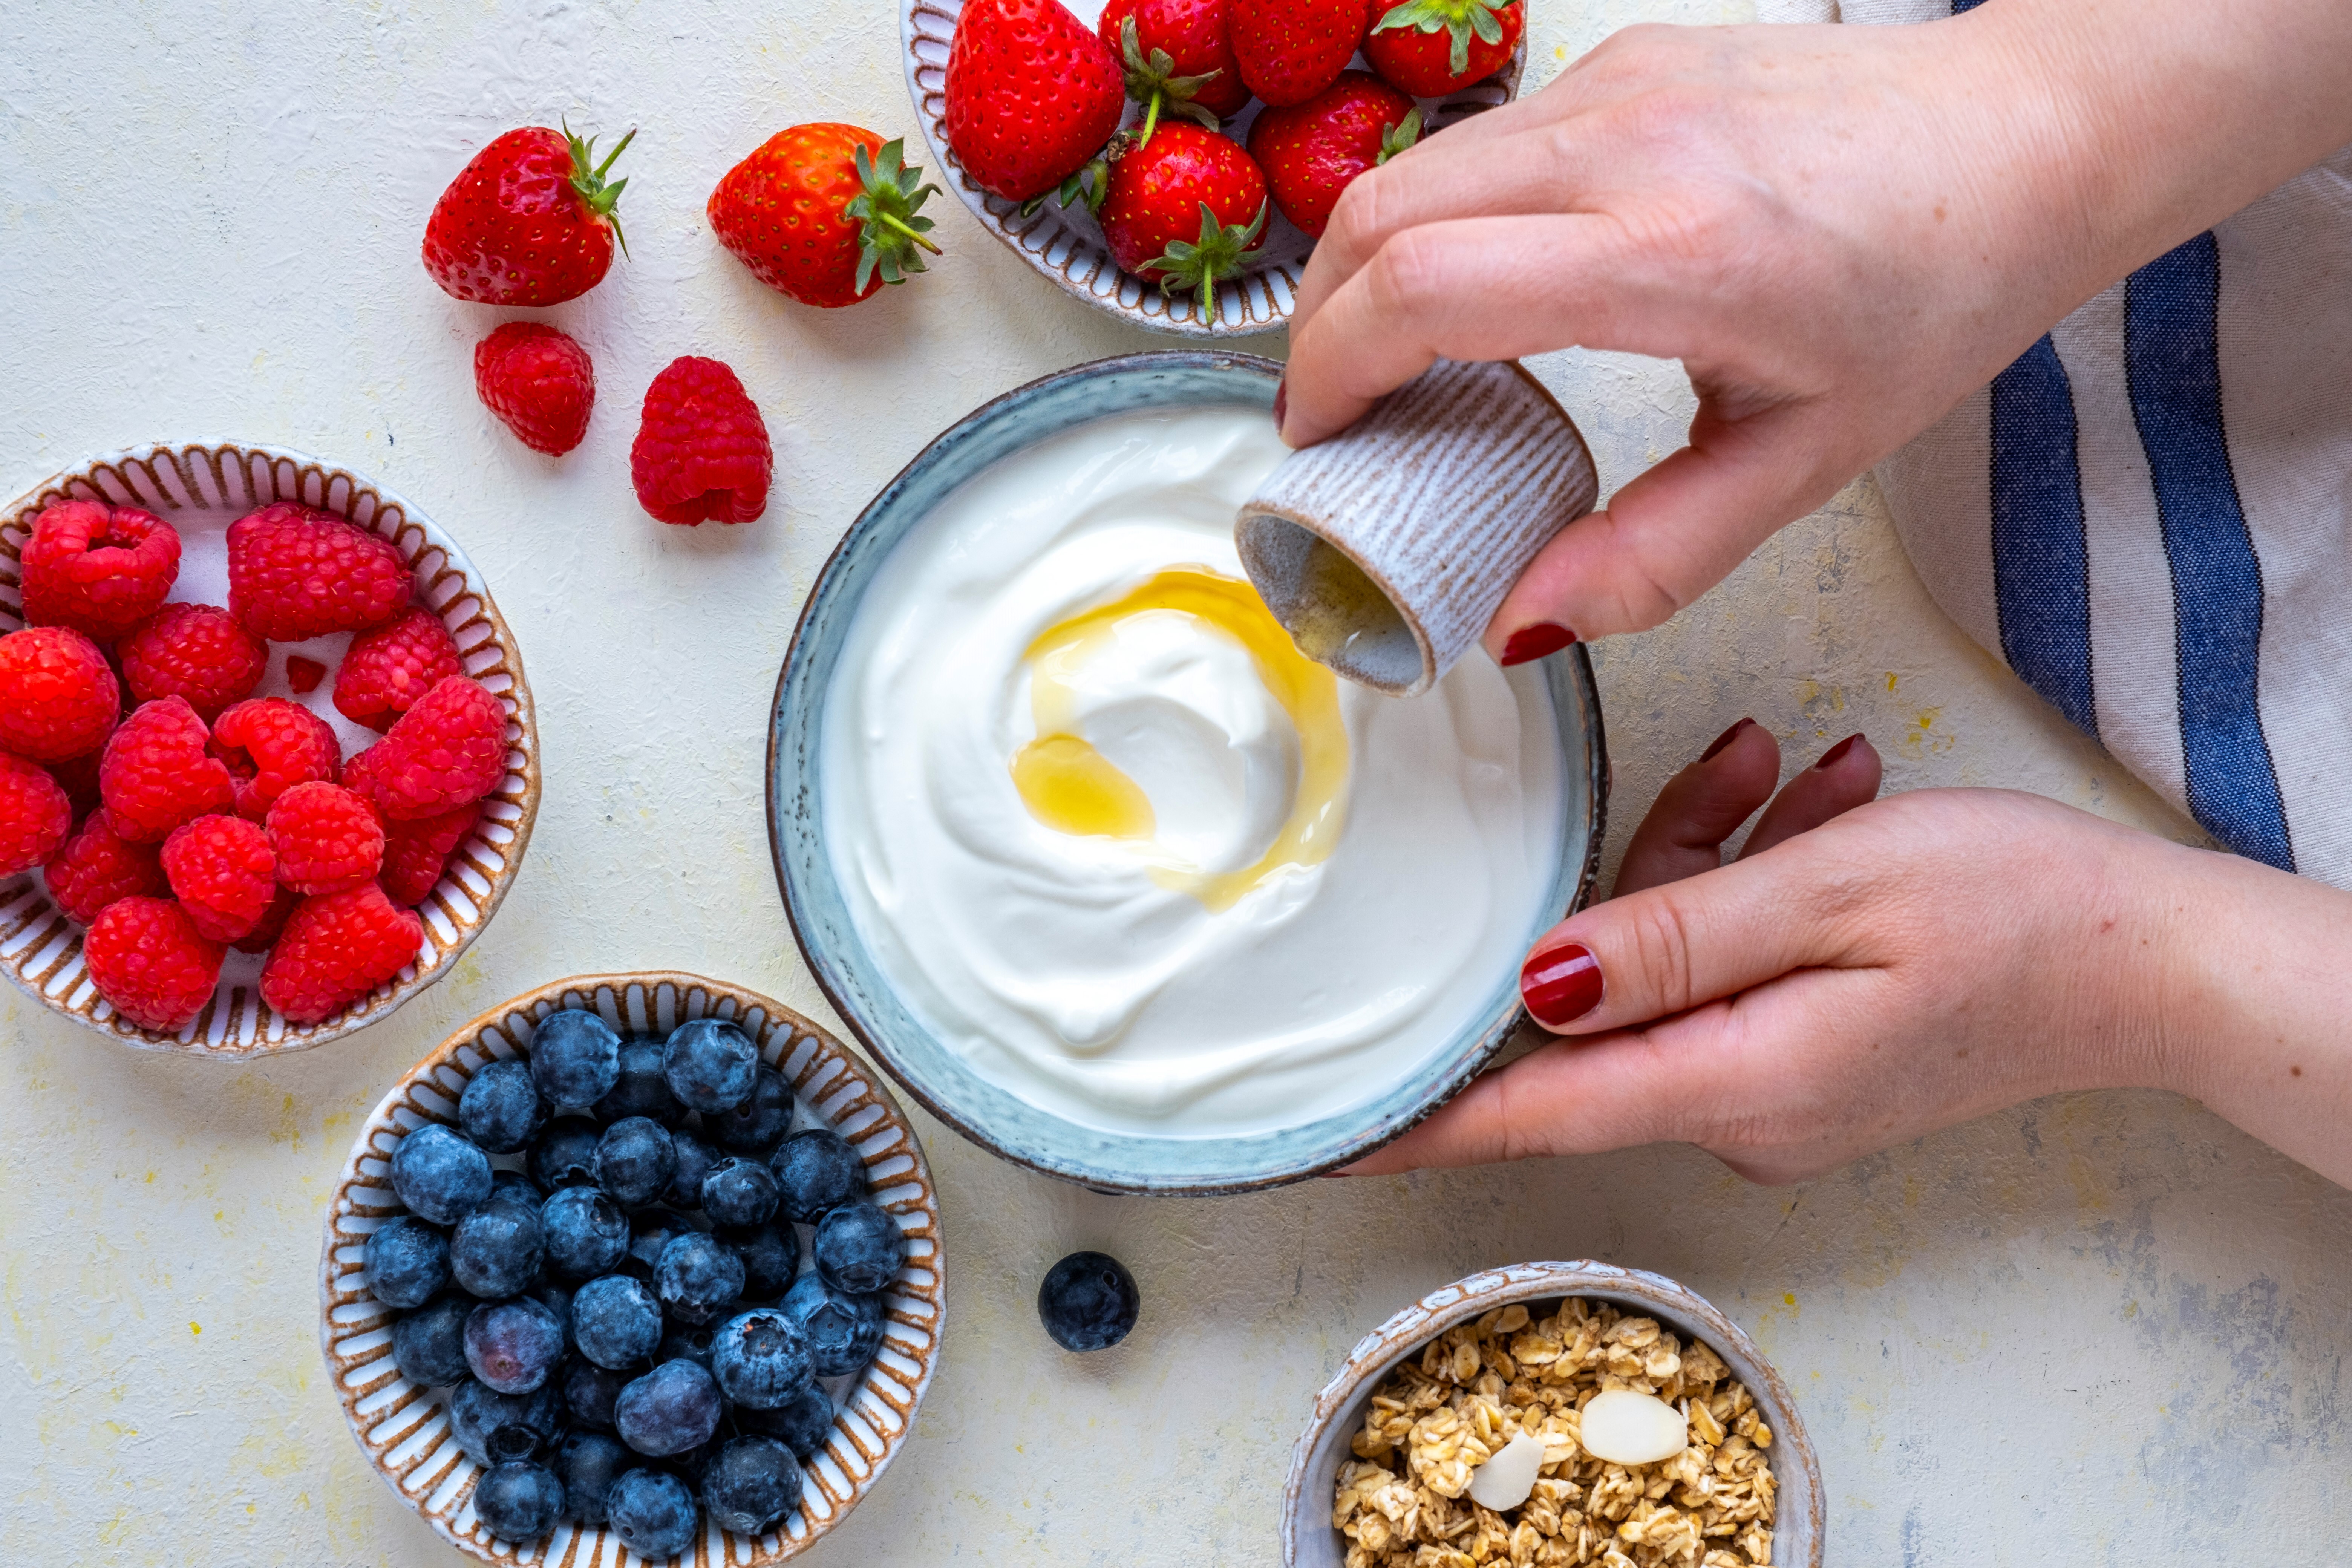 Woman hands pouring maple syrup over Greek yogurt, raspberries, strawberries, blueberries and granola on the side.